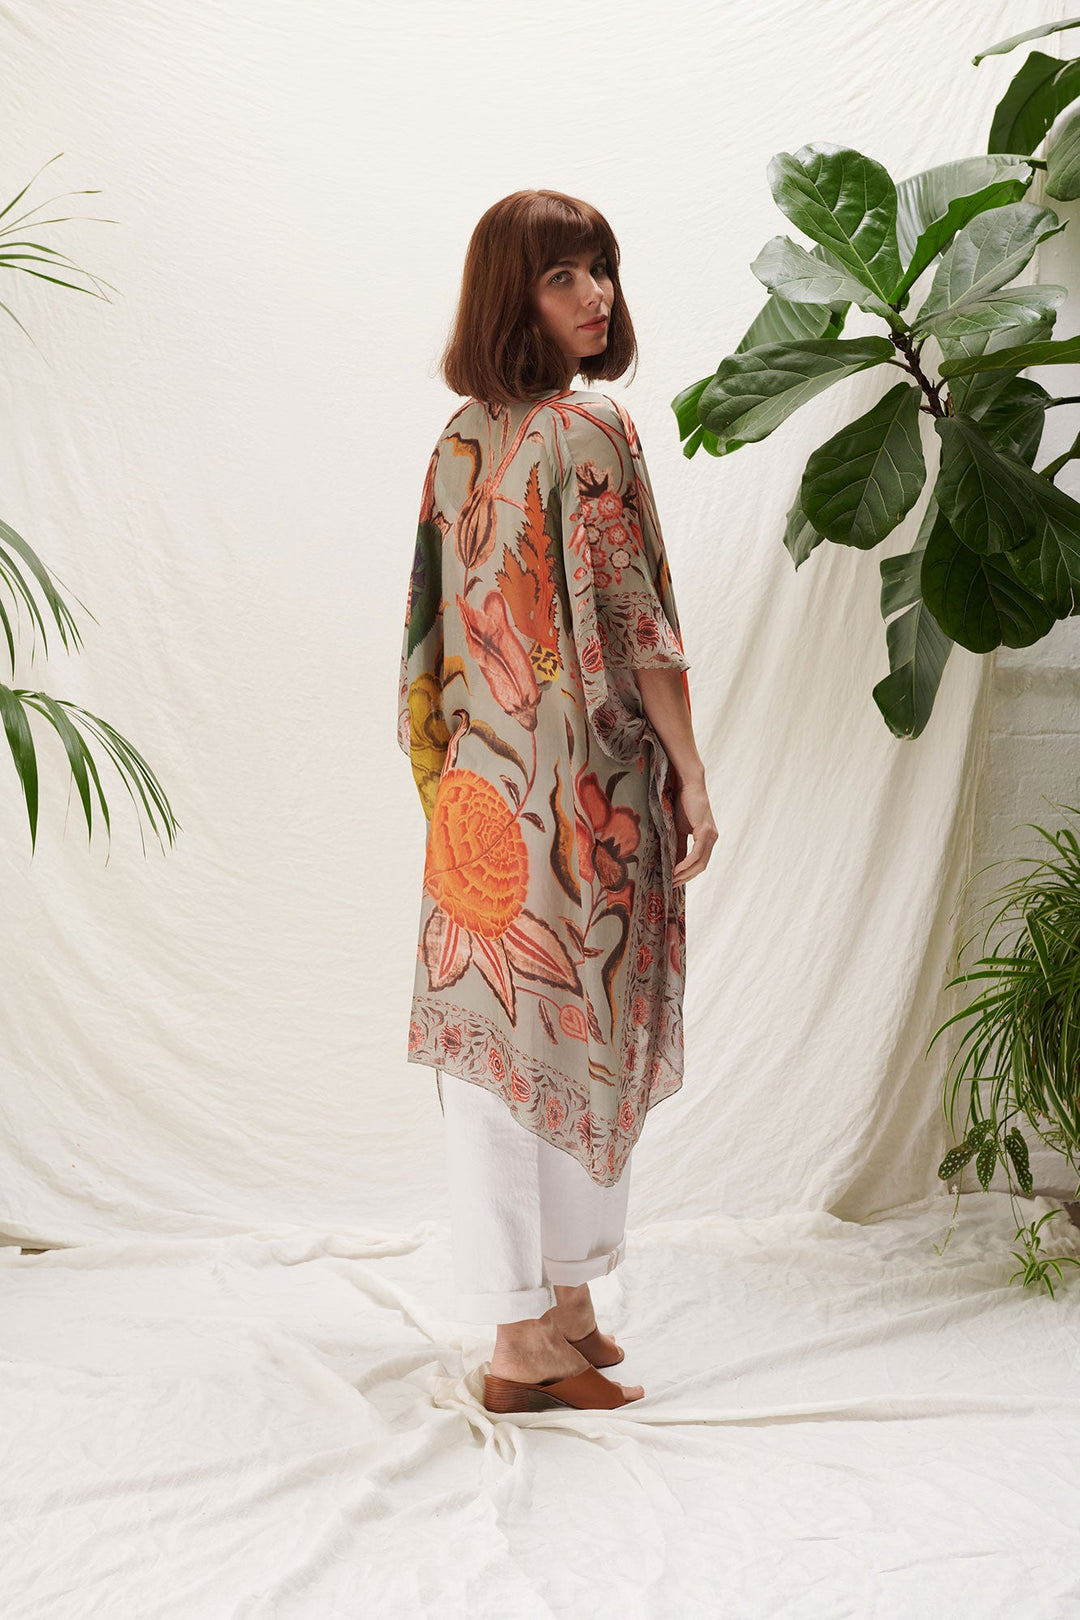 boho floral in orange and grey summer light wight cover up by one hundred stars